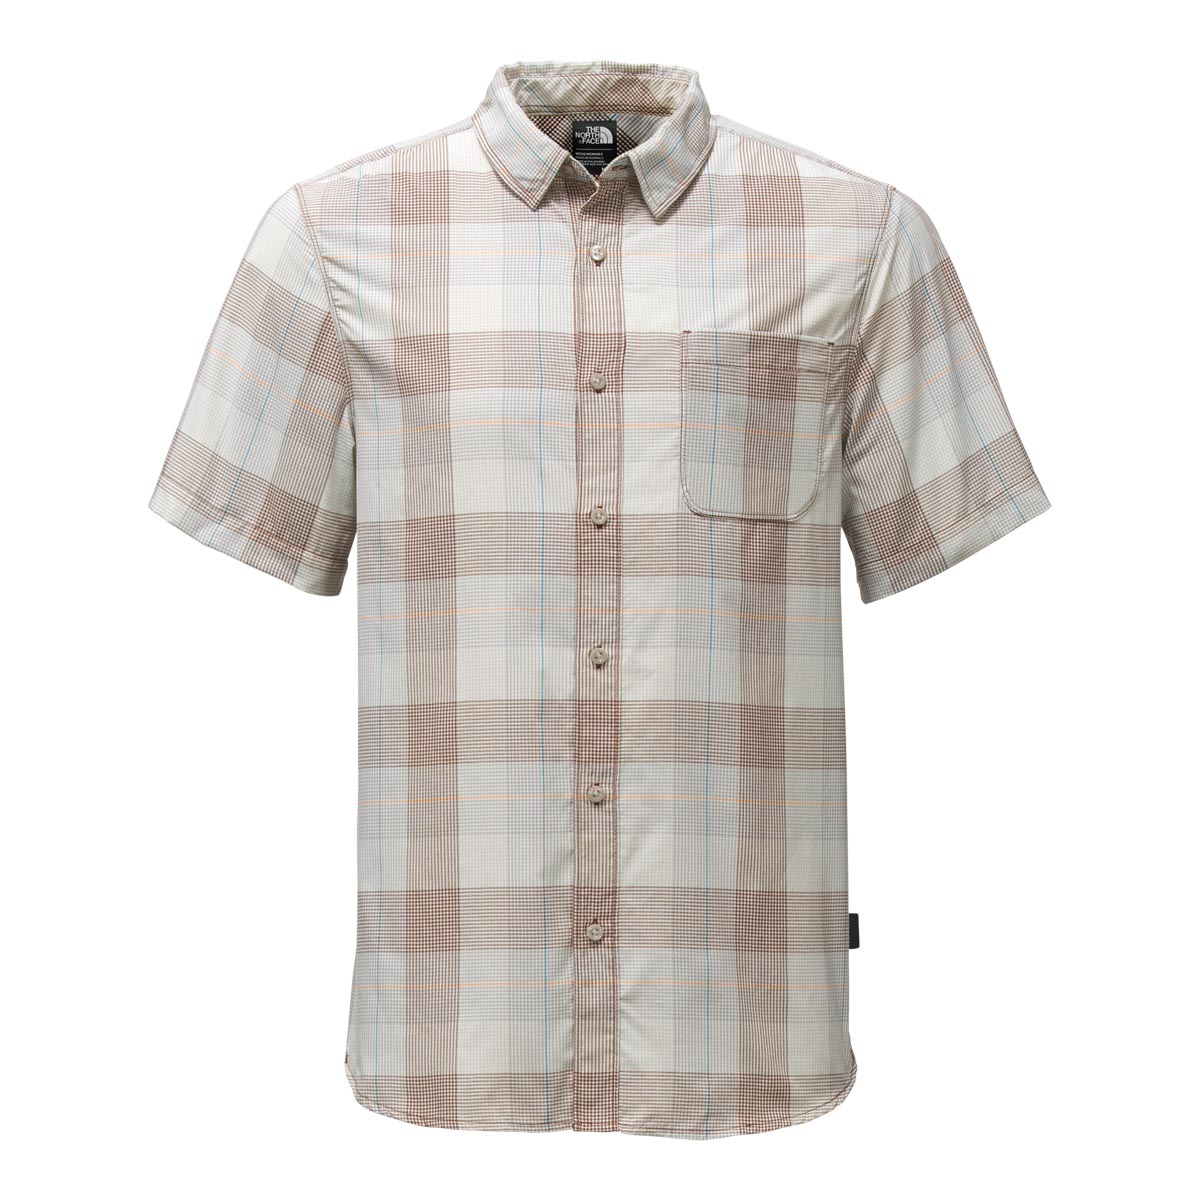 The North Face Men's Short Sleeve Expedition Shirt